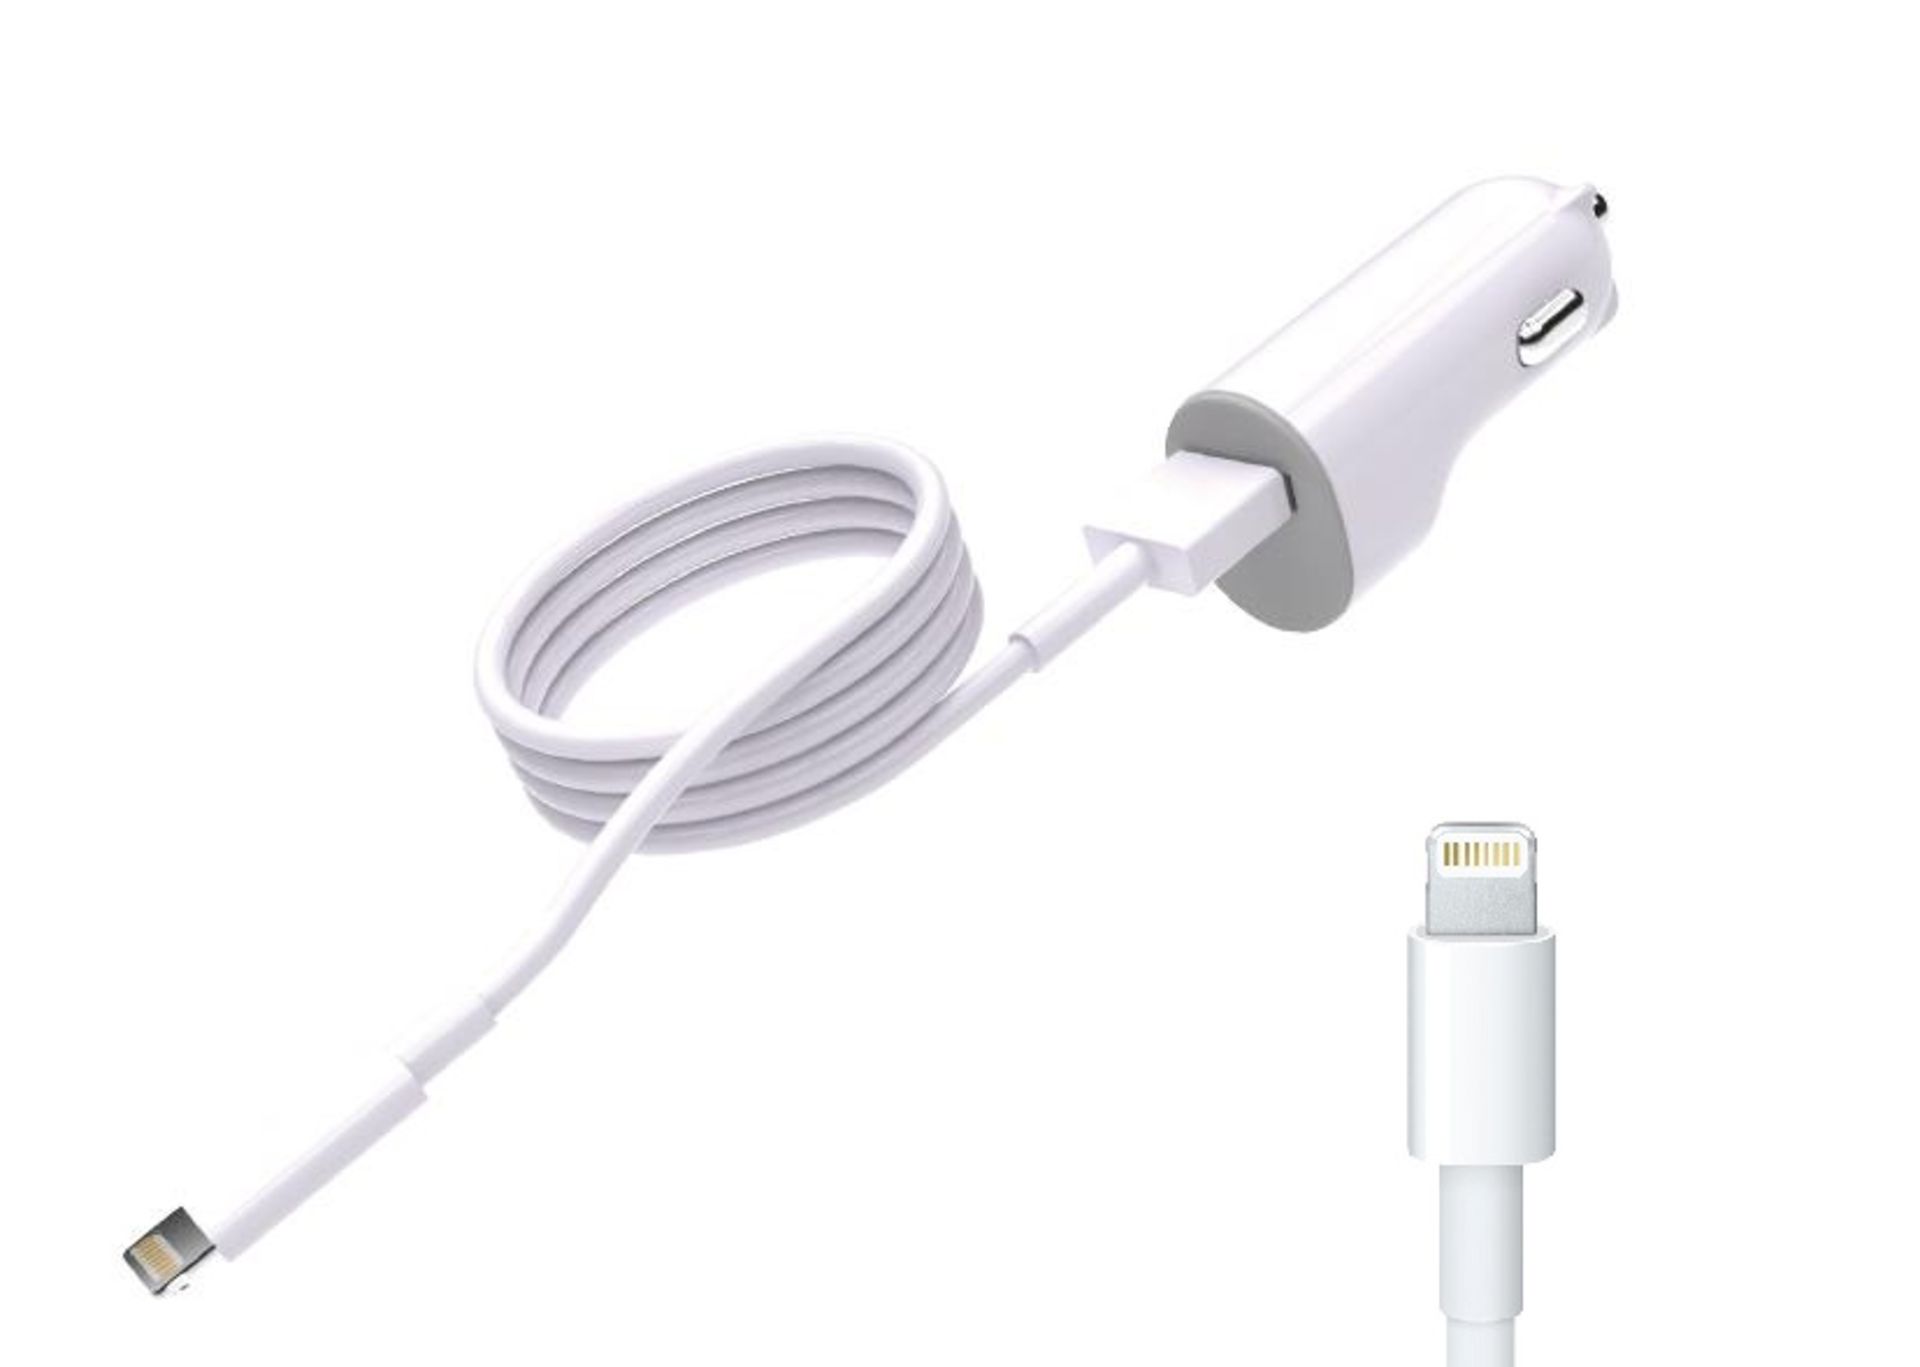 V Brand New JuiceBANK USB In Car Charging Plug And Lightning Cable For iPhone/iPod/iPad - Image